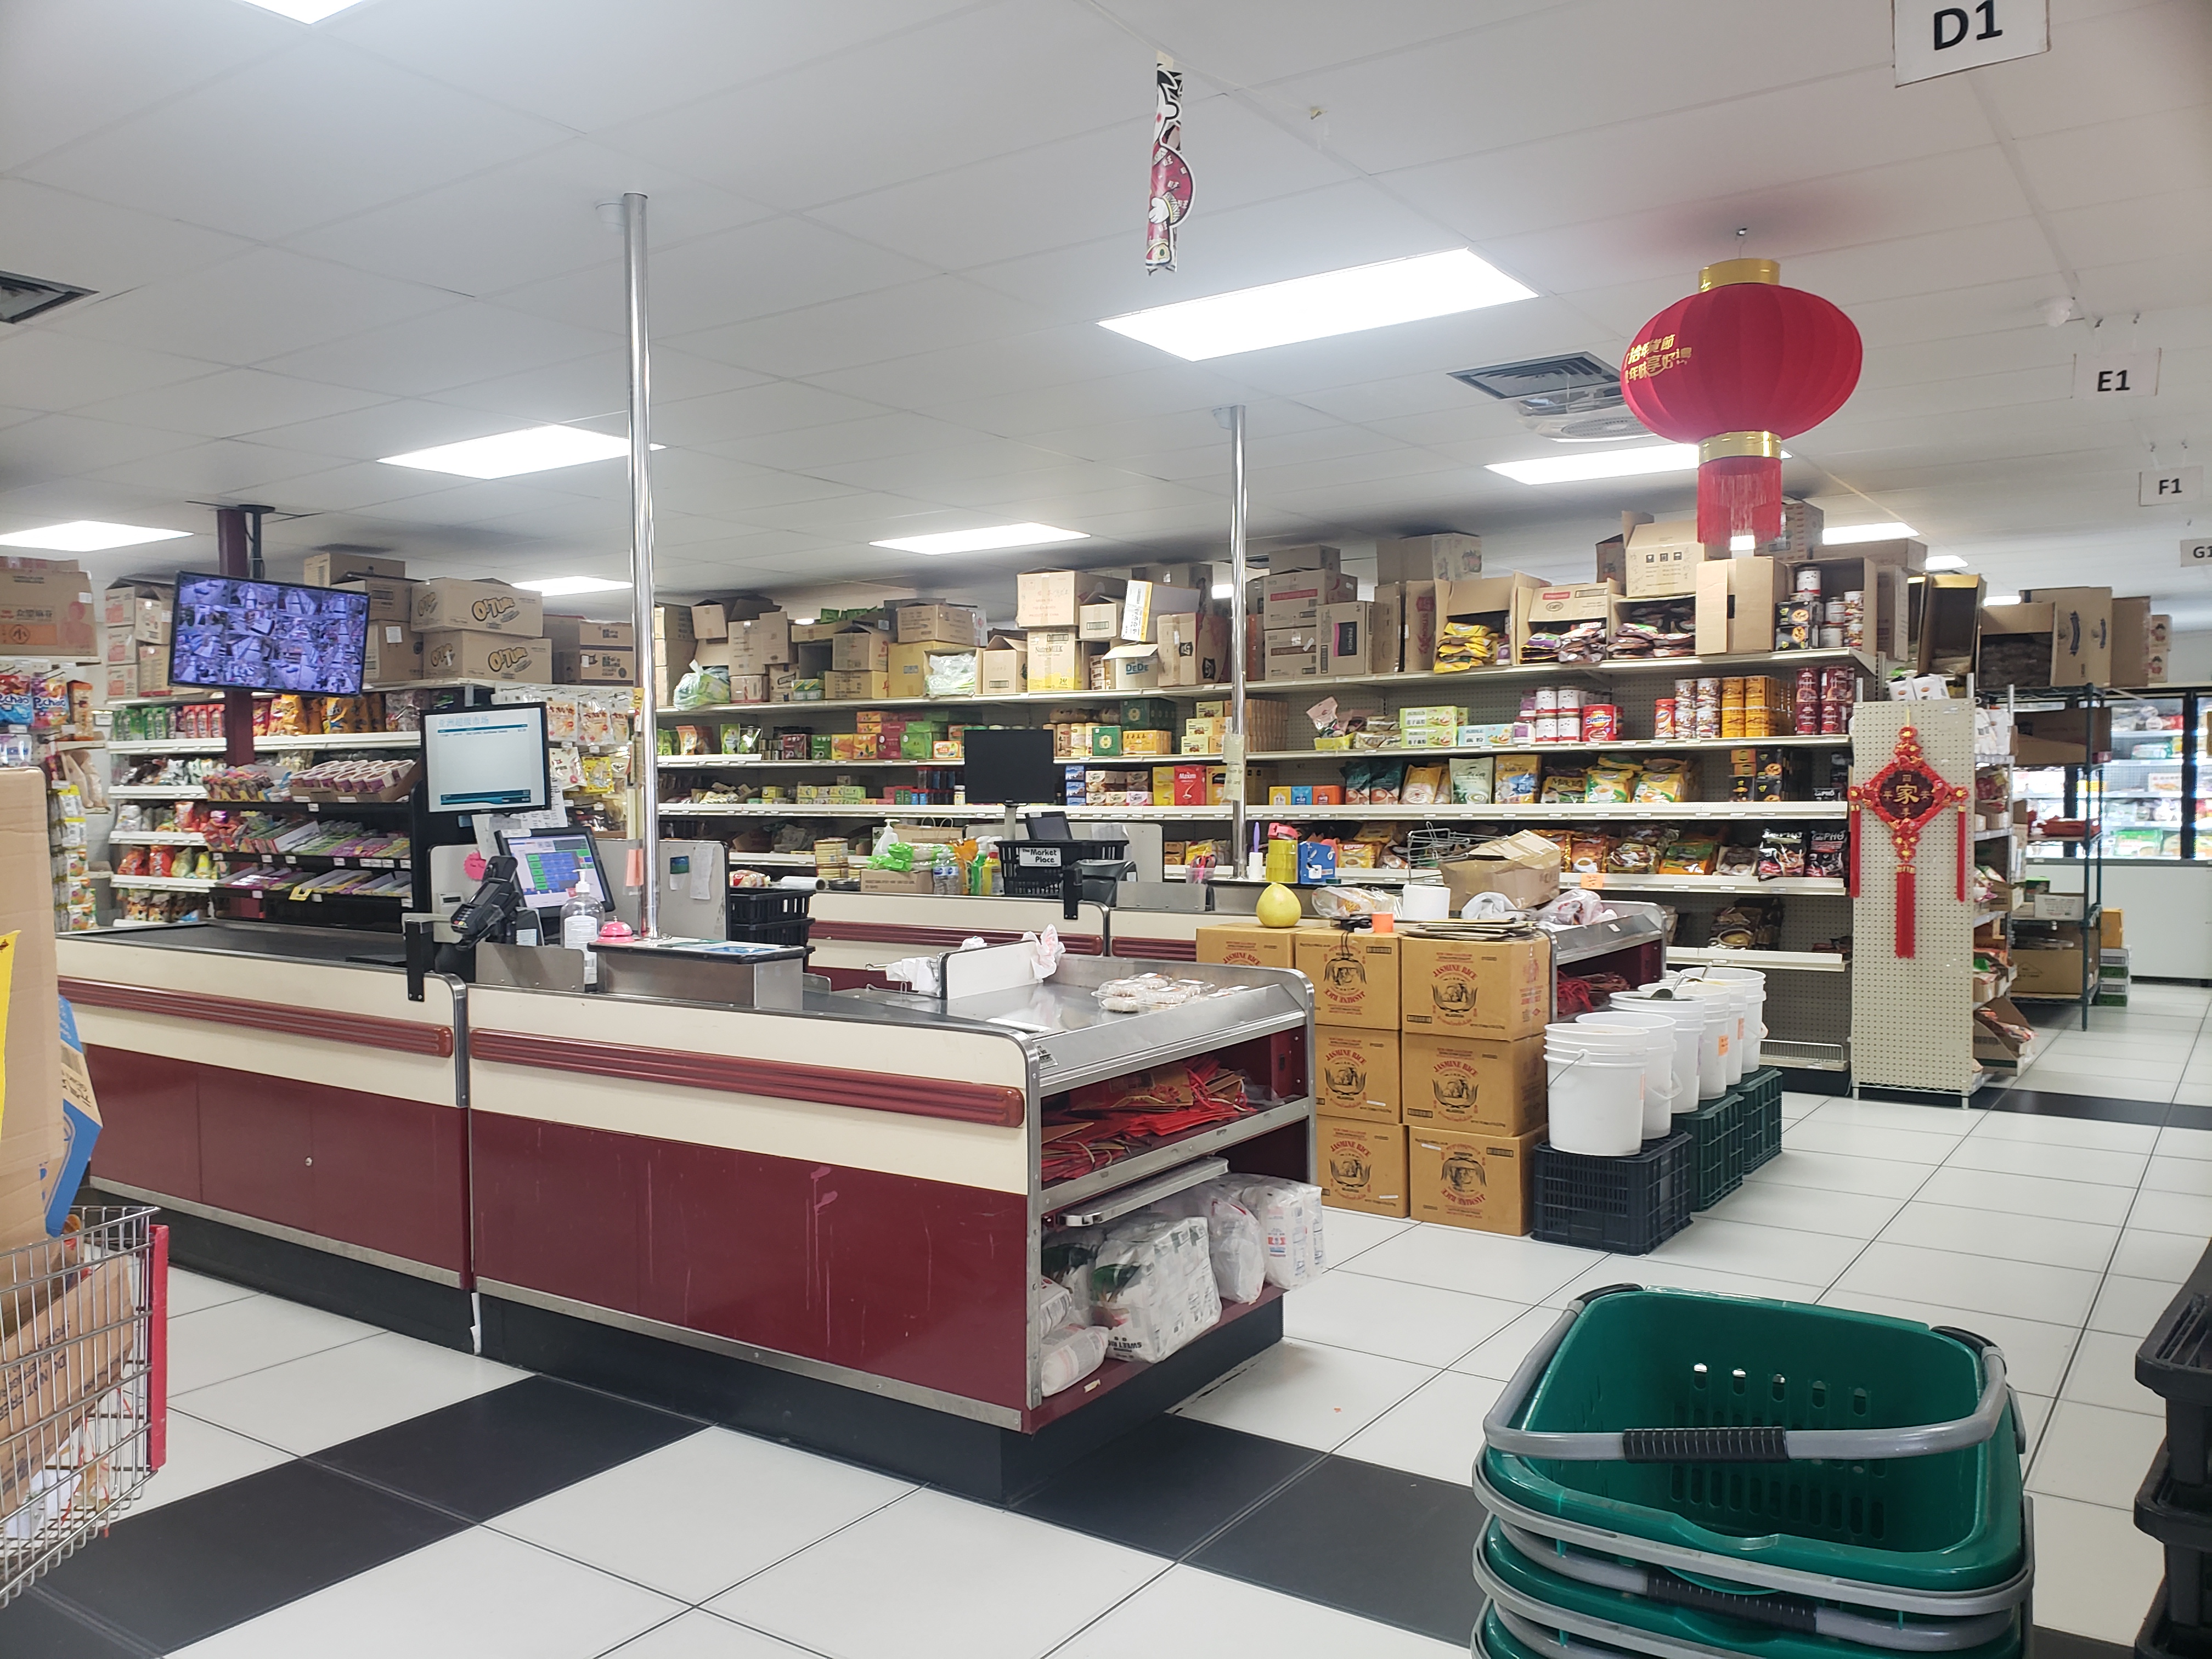 Inside Asian Supermarket on North Prospect in Champaign, there is a brightly lit store with a simple belt at check out. Photo by Elisabeth Paulus.